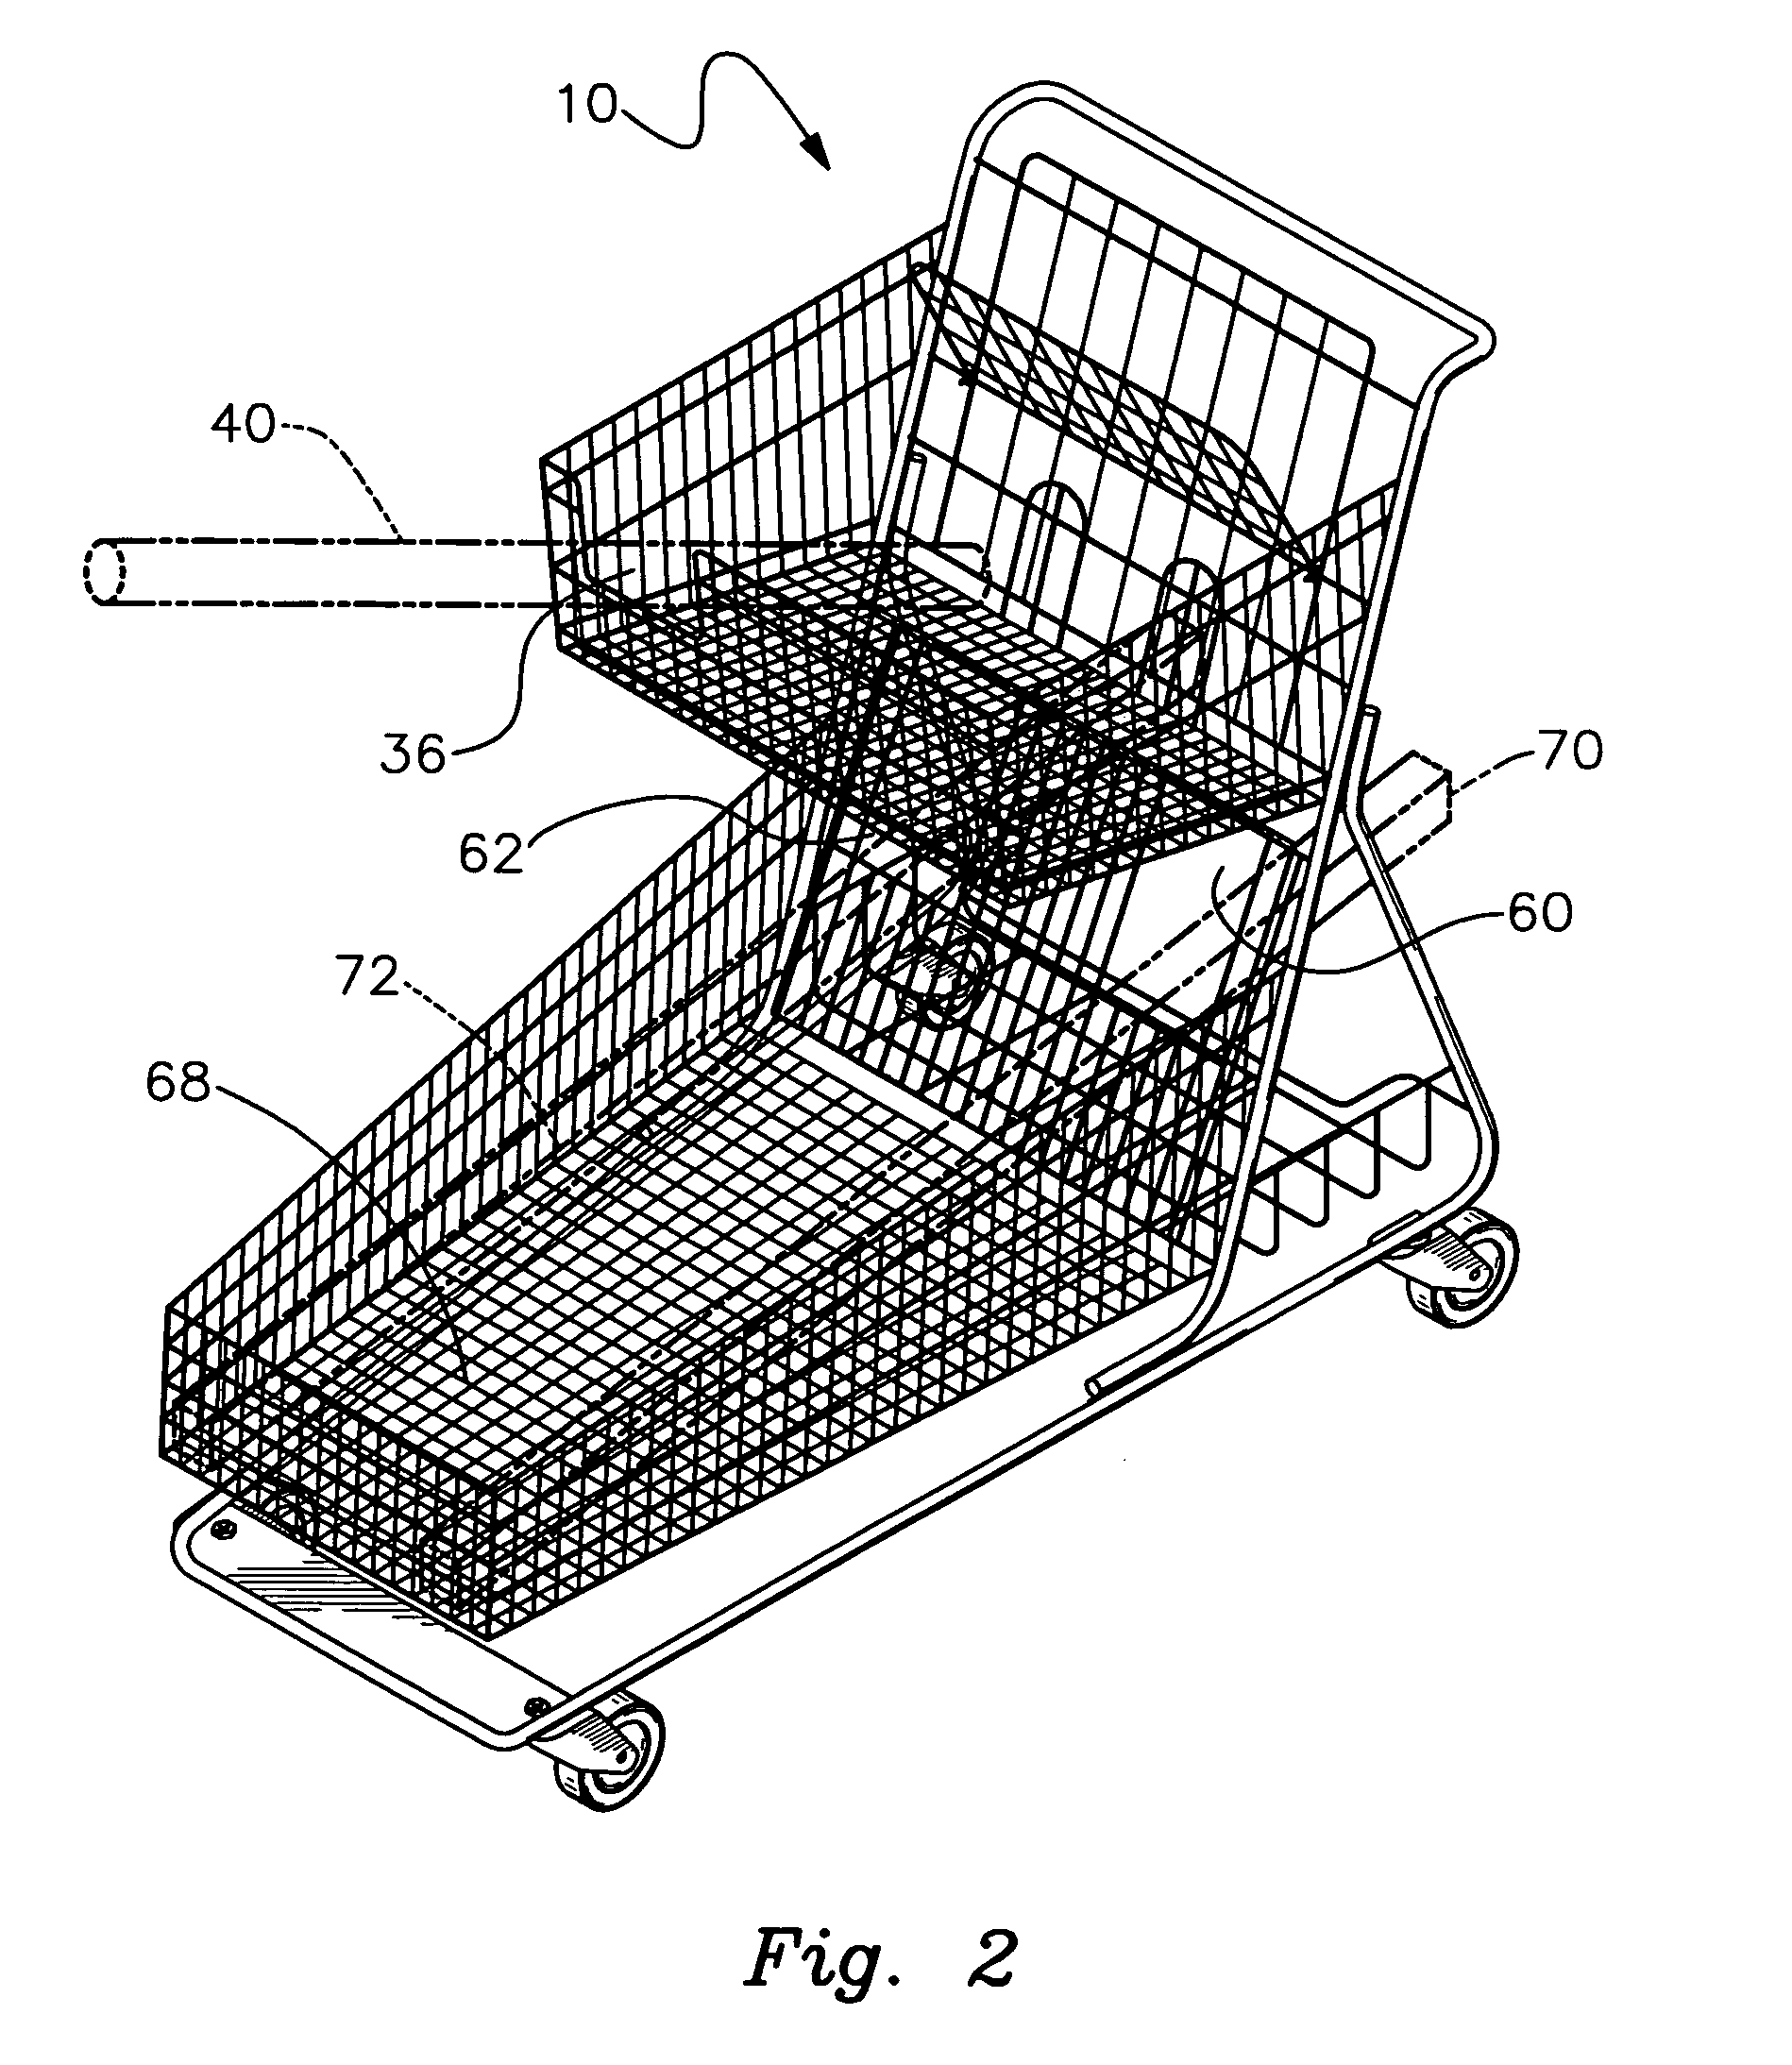 Shopping cart adapted to receive elongated items